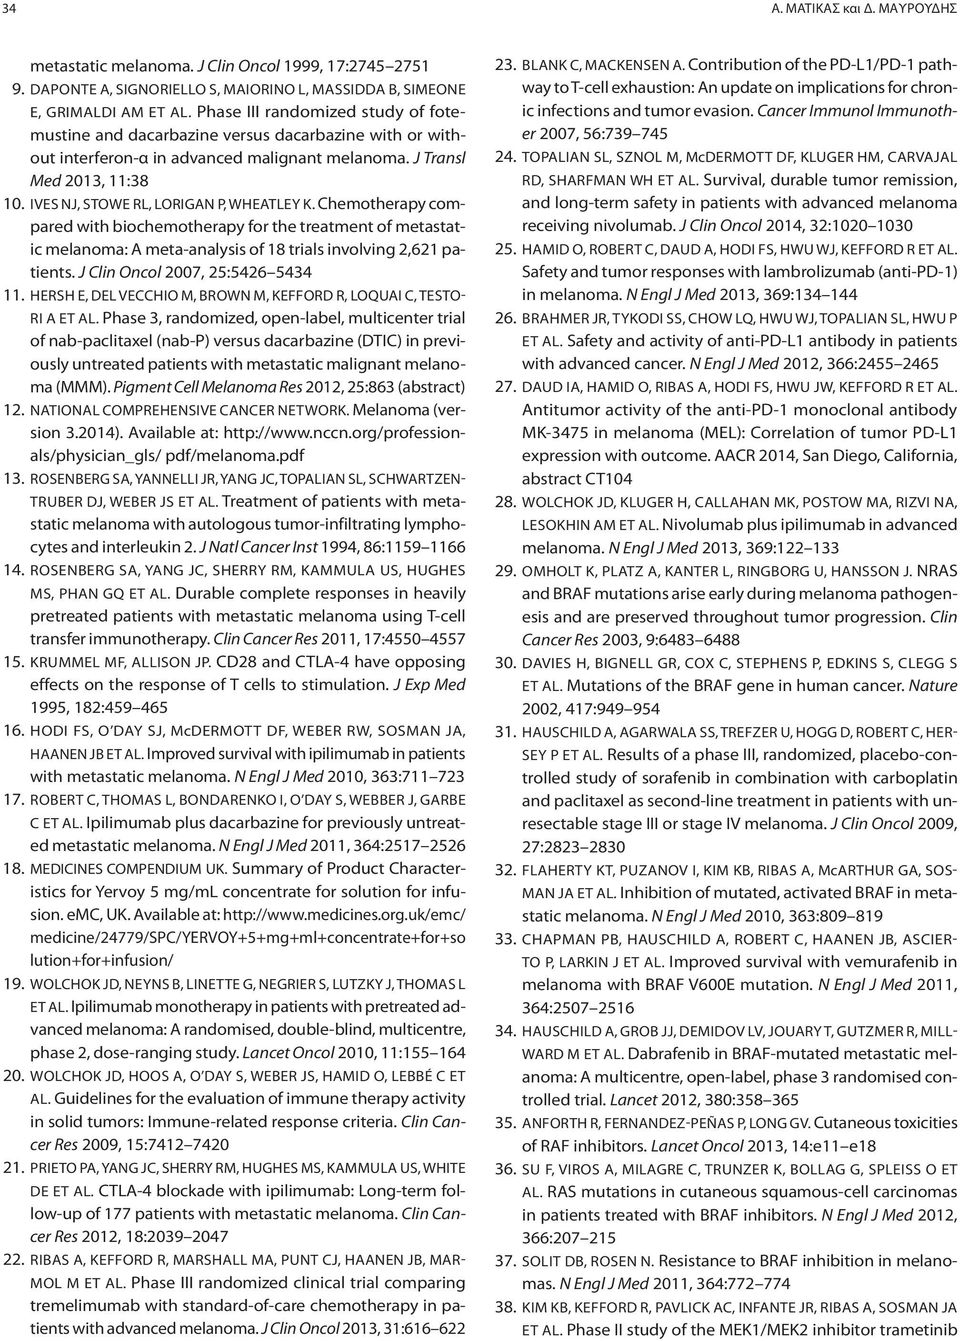 IVES NJ, STOWE RL, LORIGAN P, WHEATLEY K. Chemotherapy compared with biochemotherapy for the treatment of metastatic melanoma: A meta-analysis of 18 trials involving 2,621 patients.